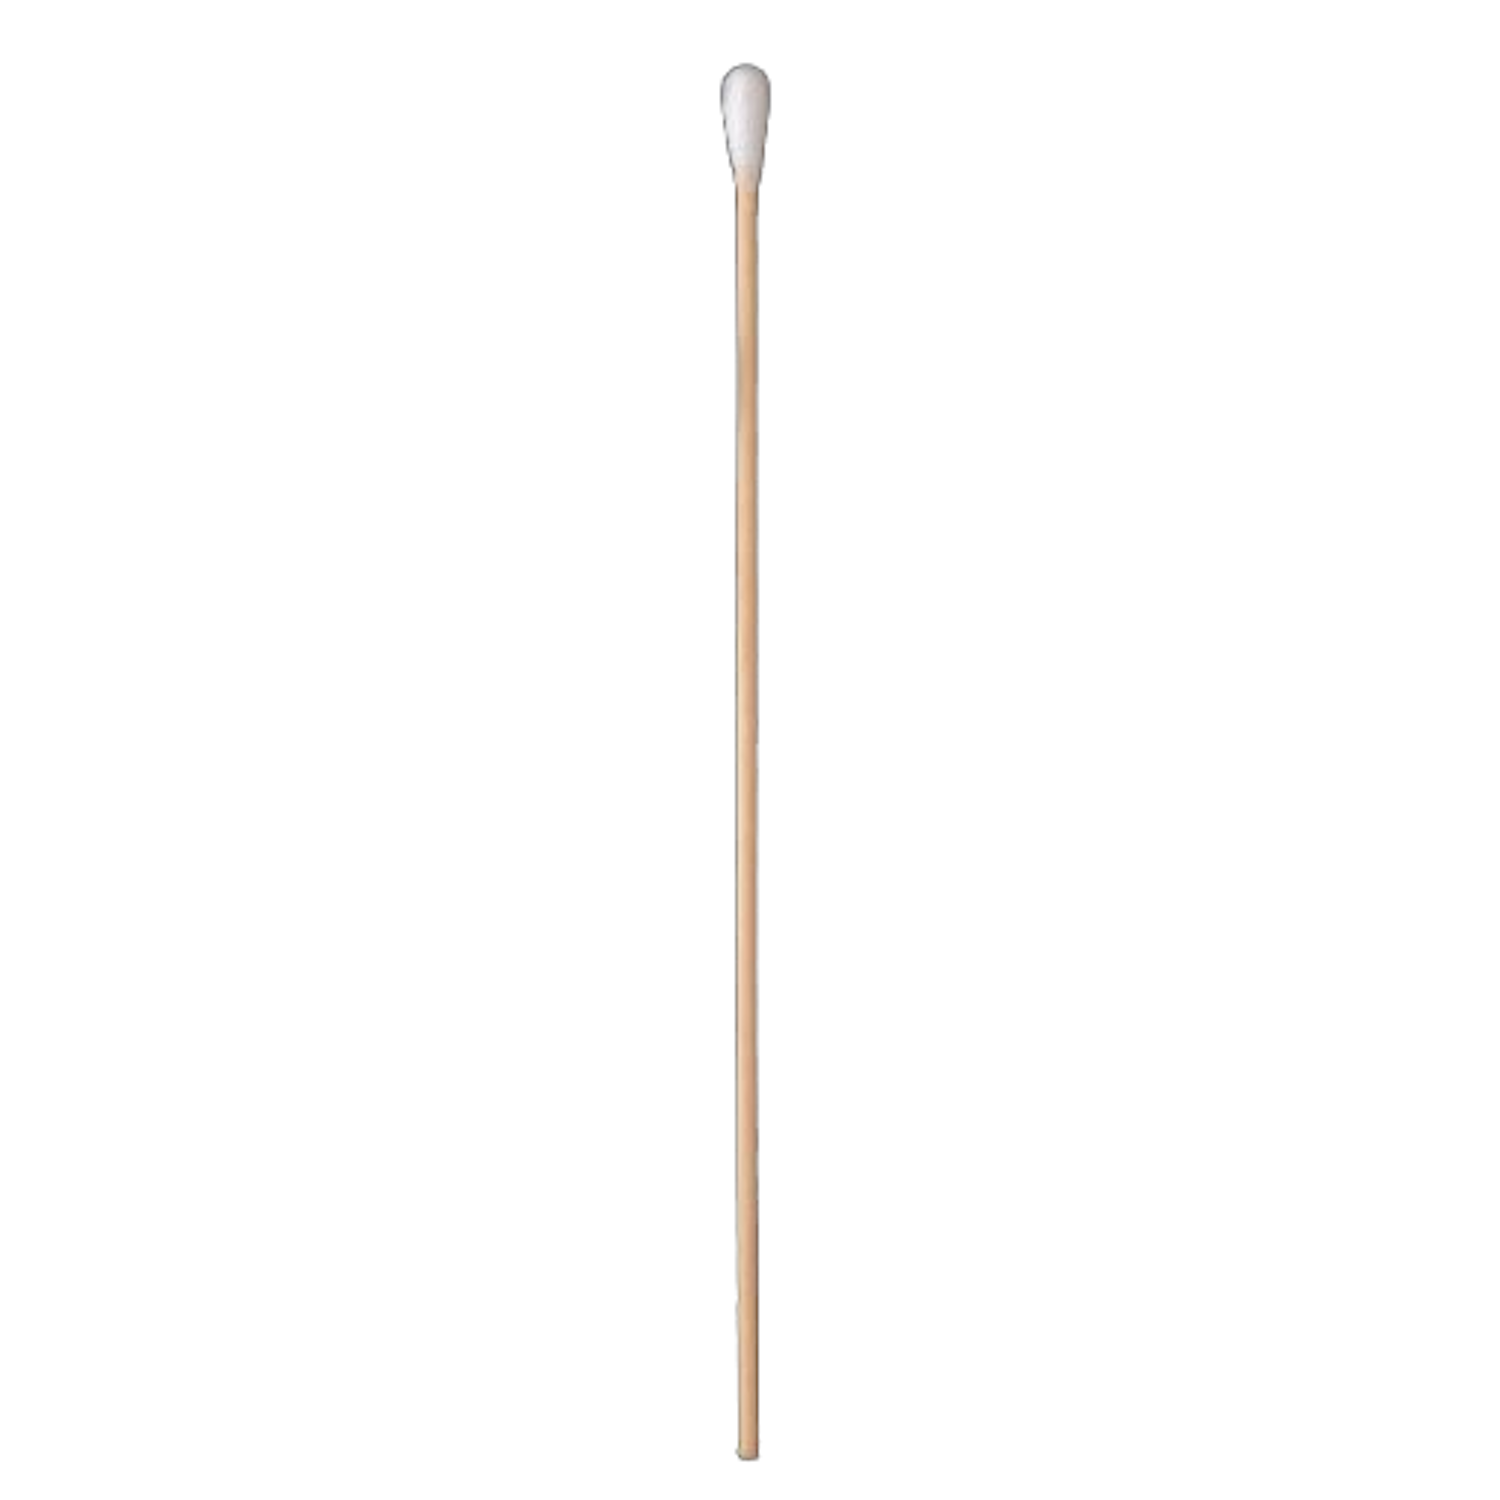 Plain Cotton Swabs Wood Stick | Sterile  | Pack of 1000 (100 x 10)